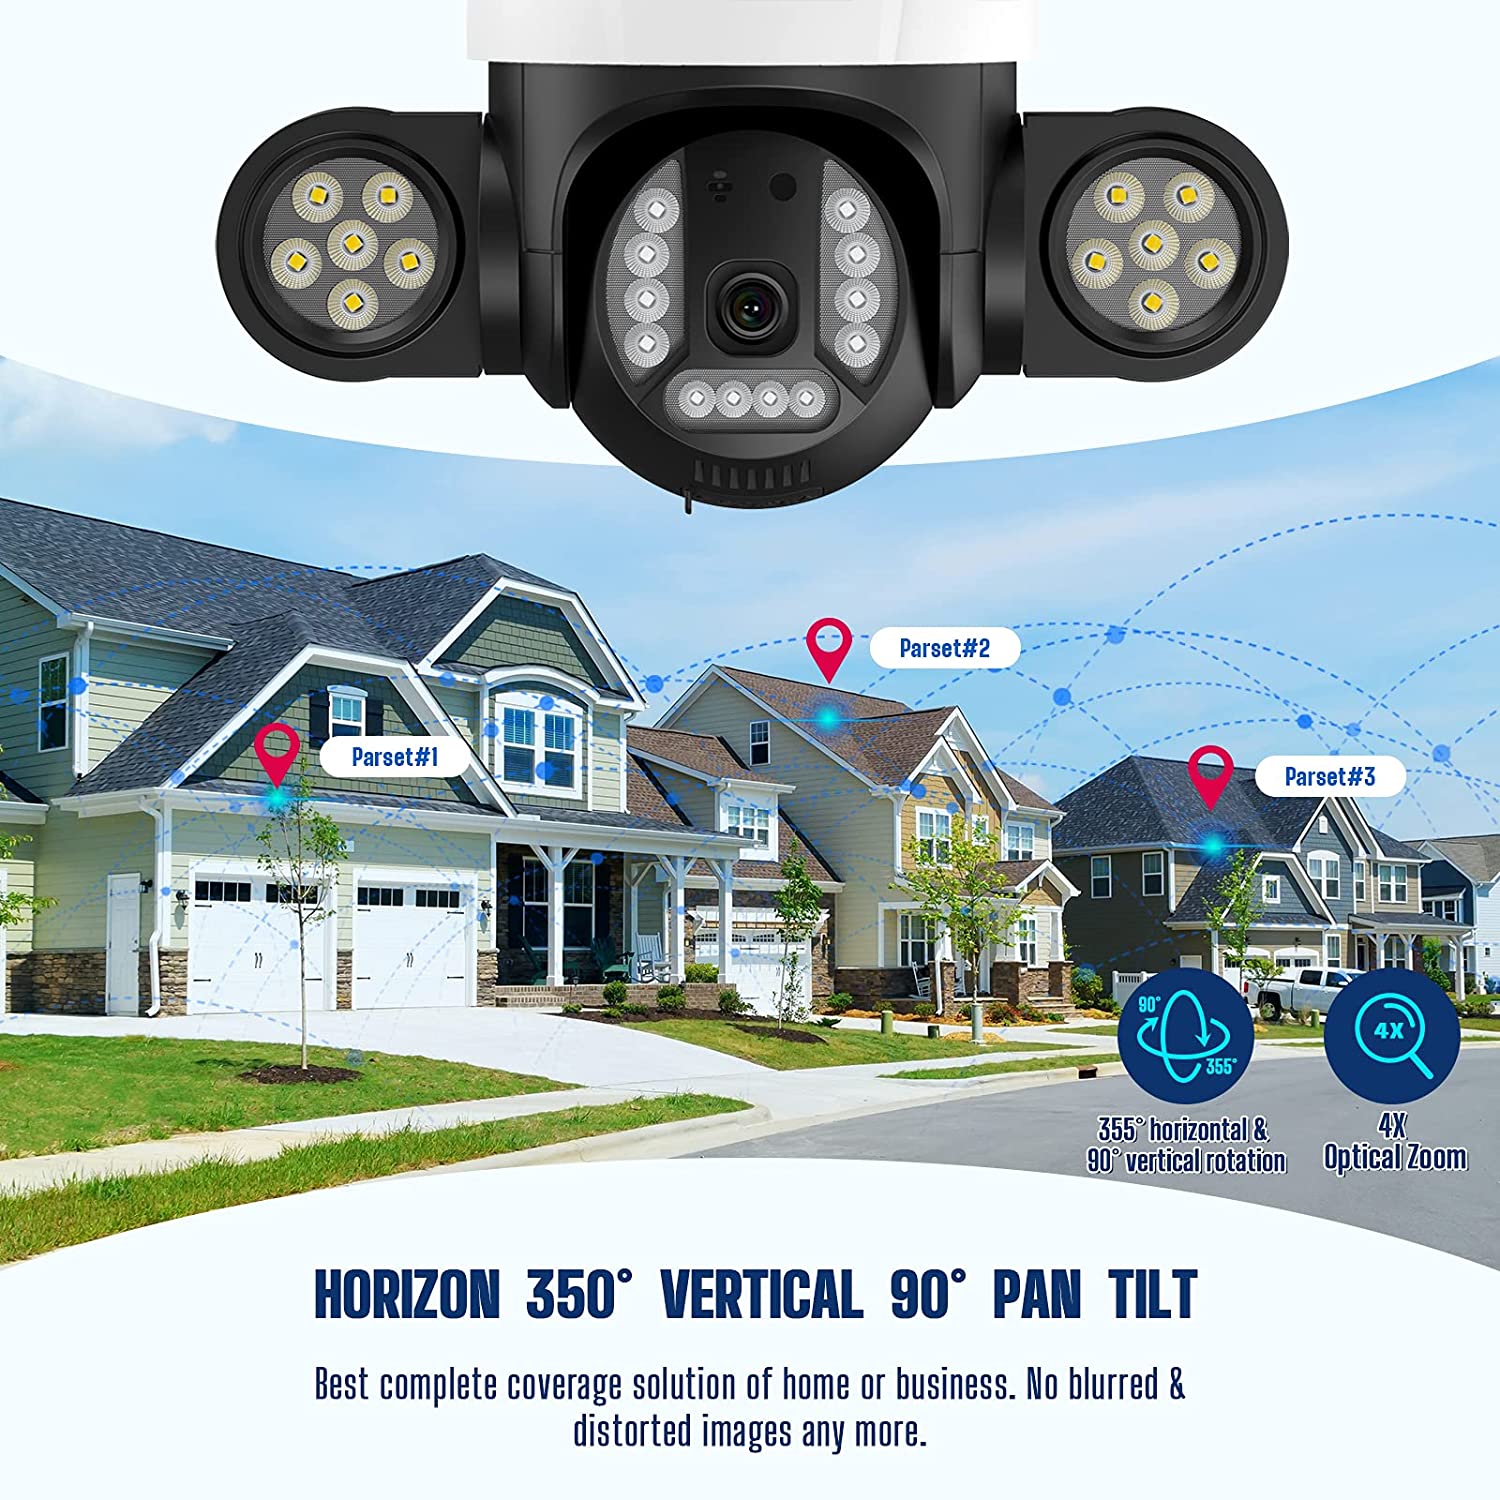 Toguard AP15 3MP PTZ WiFi Security Camera Outdoor Wireless Floodlights, IP Dome Camera with AI Human Detection HD Color (Only Available in the U.S)